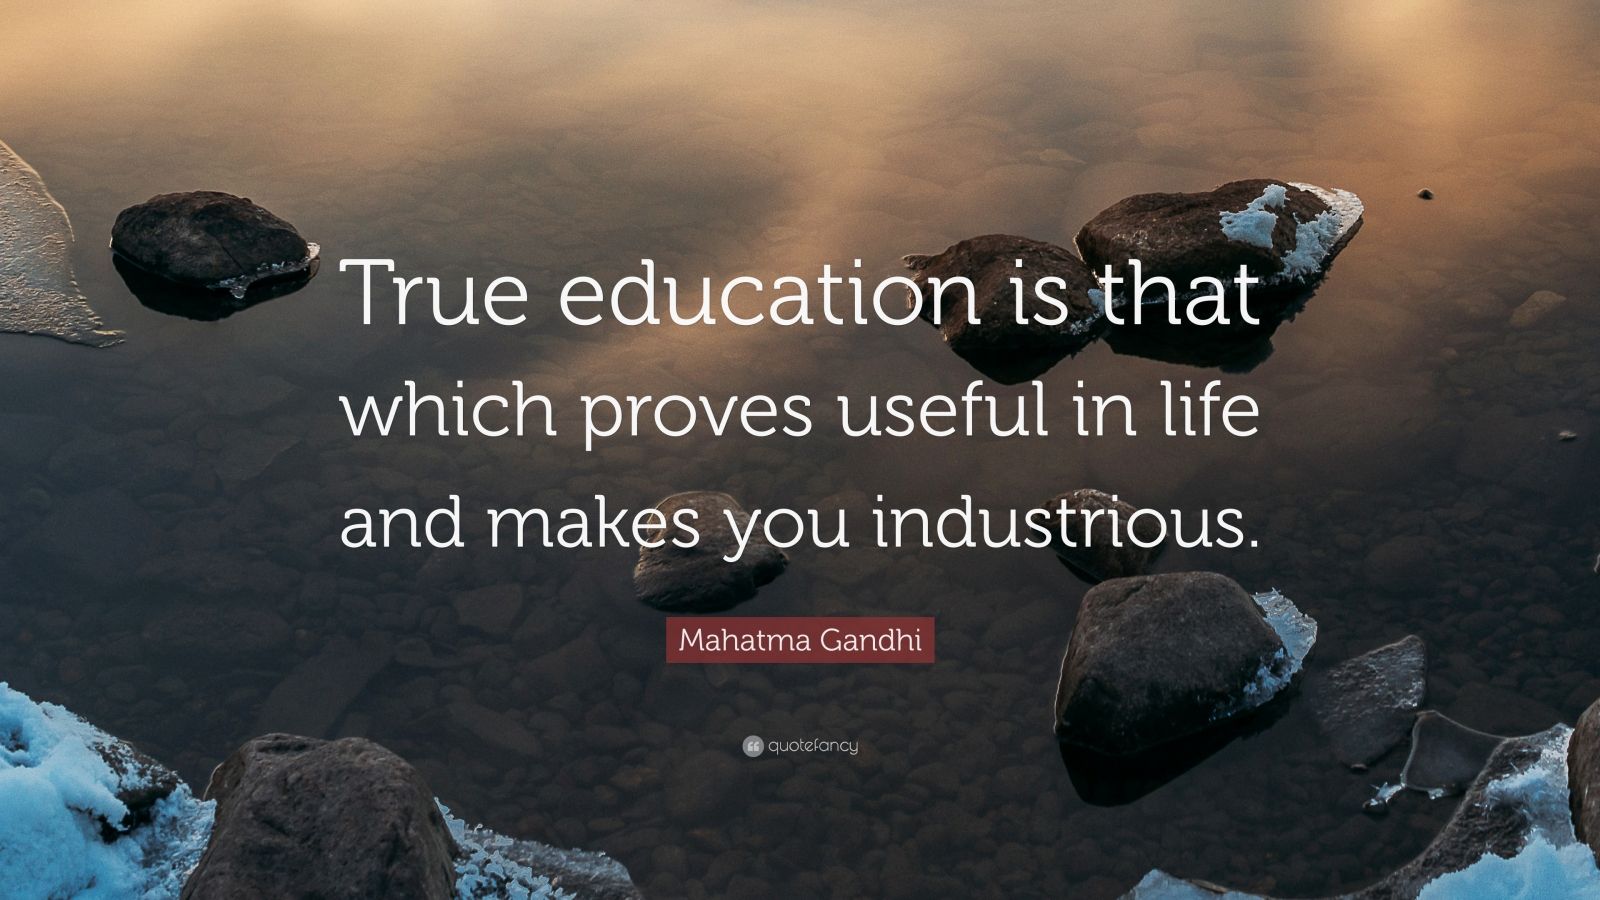 Mahatma Gandhi Quote: “True education is that which proves useful in ...